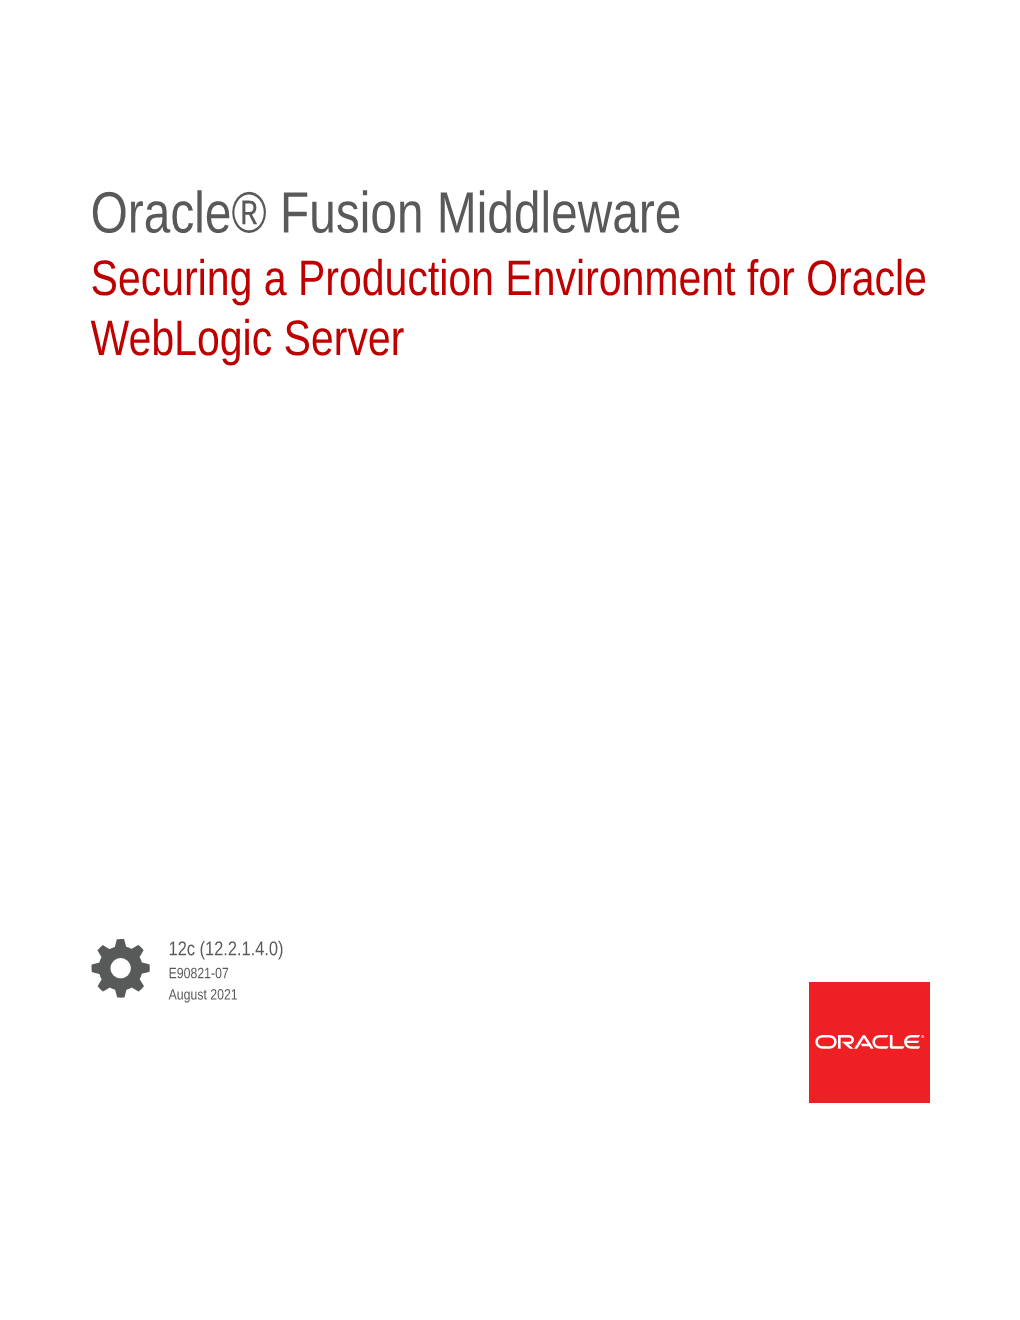 Securing a Production Environment for Oracle Weblogic Server